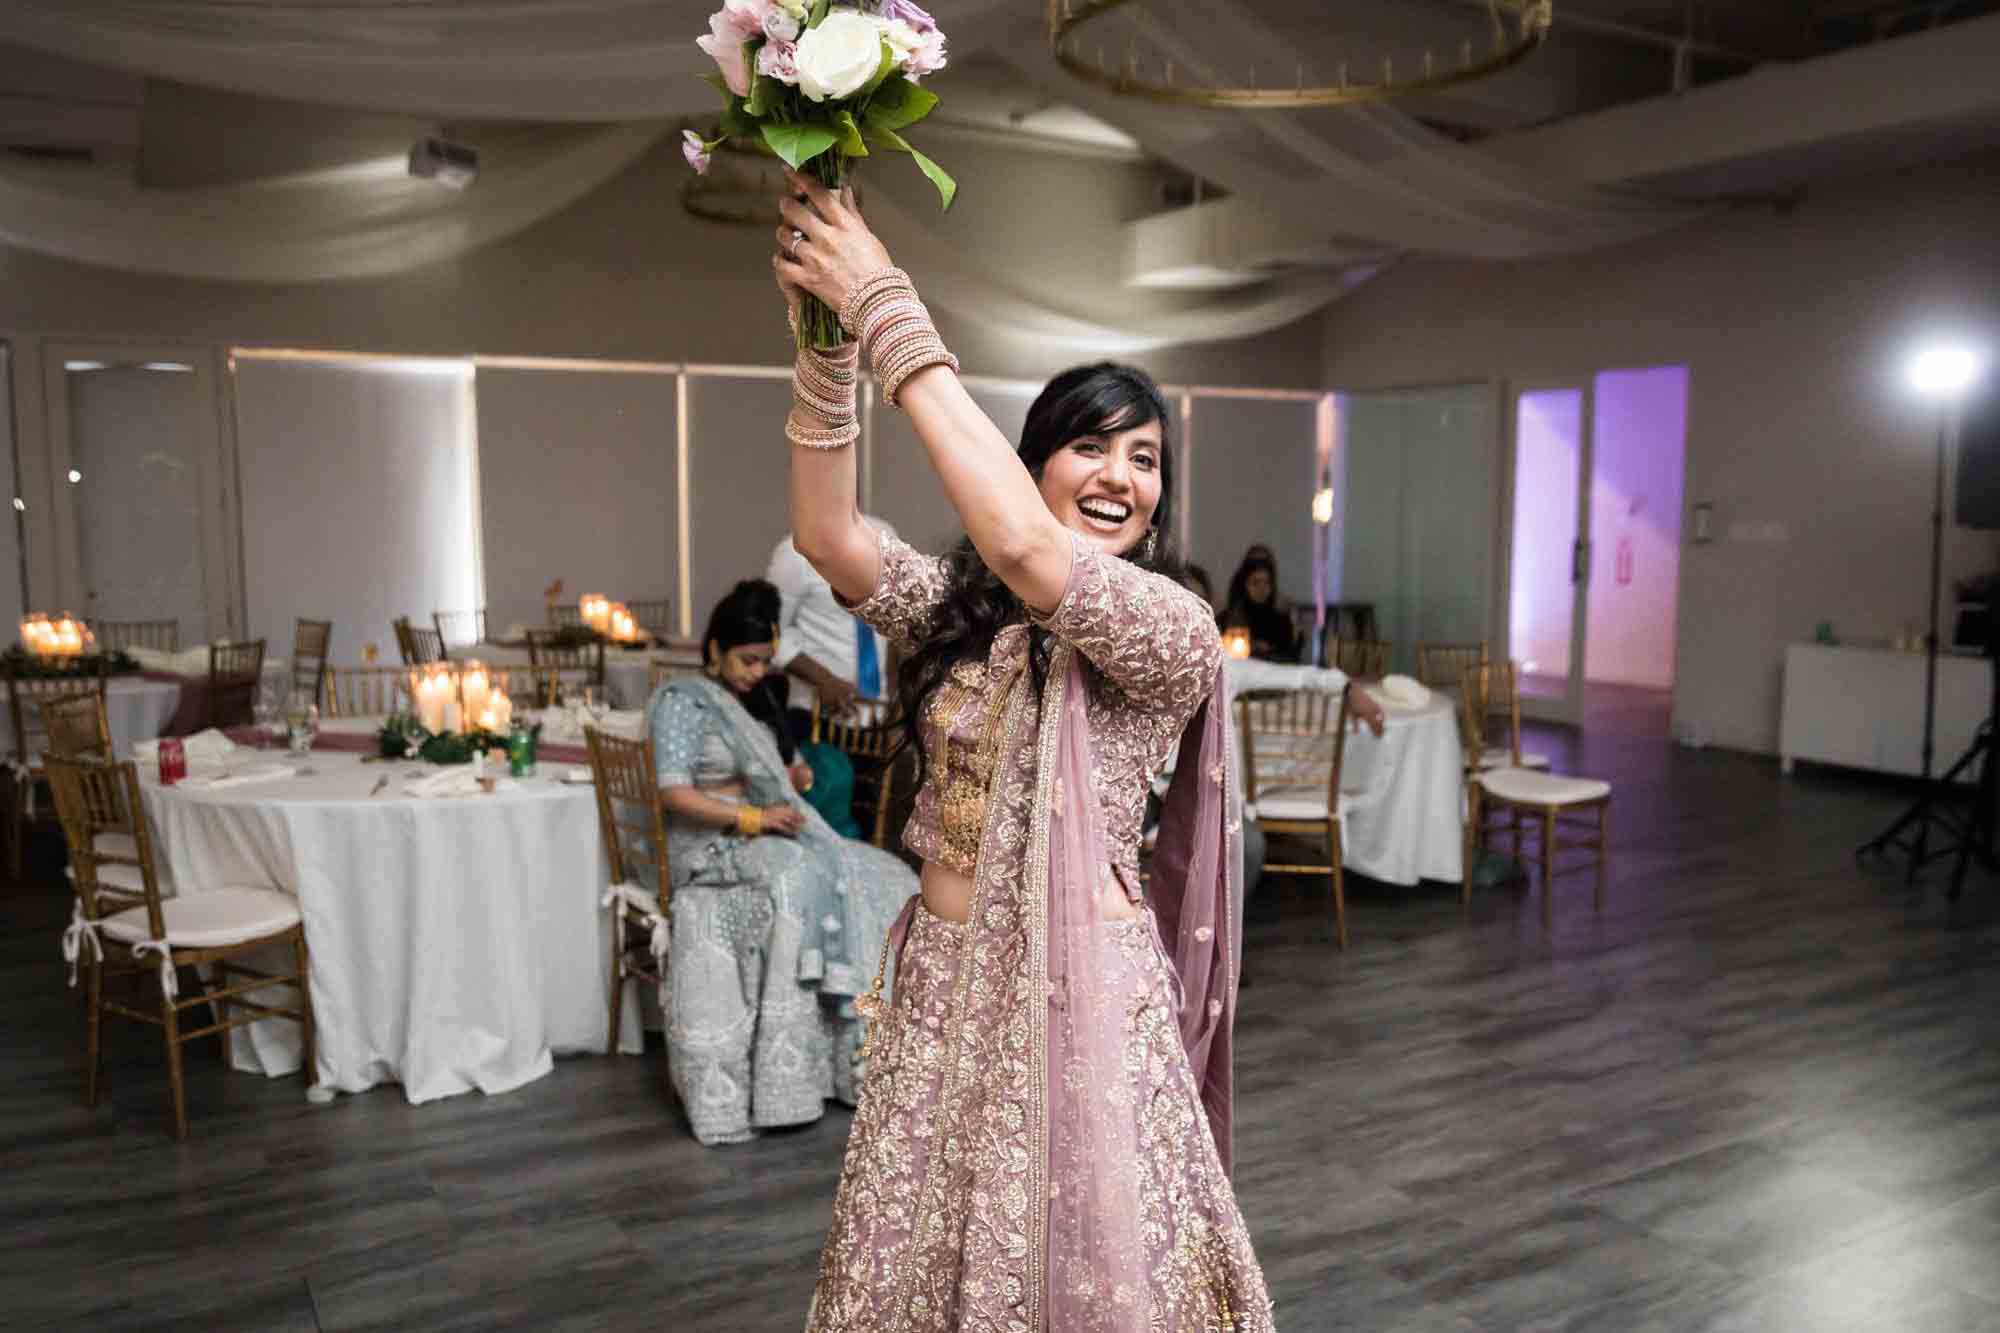 Bride holding up flower bouquet while wearing pink Indian wedding dress for article on wedding reception game ideas